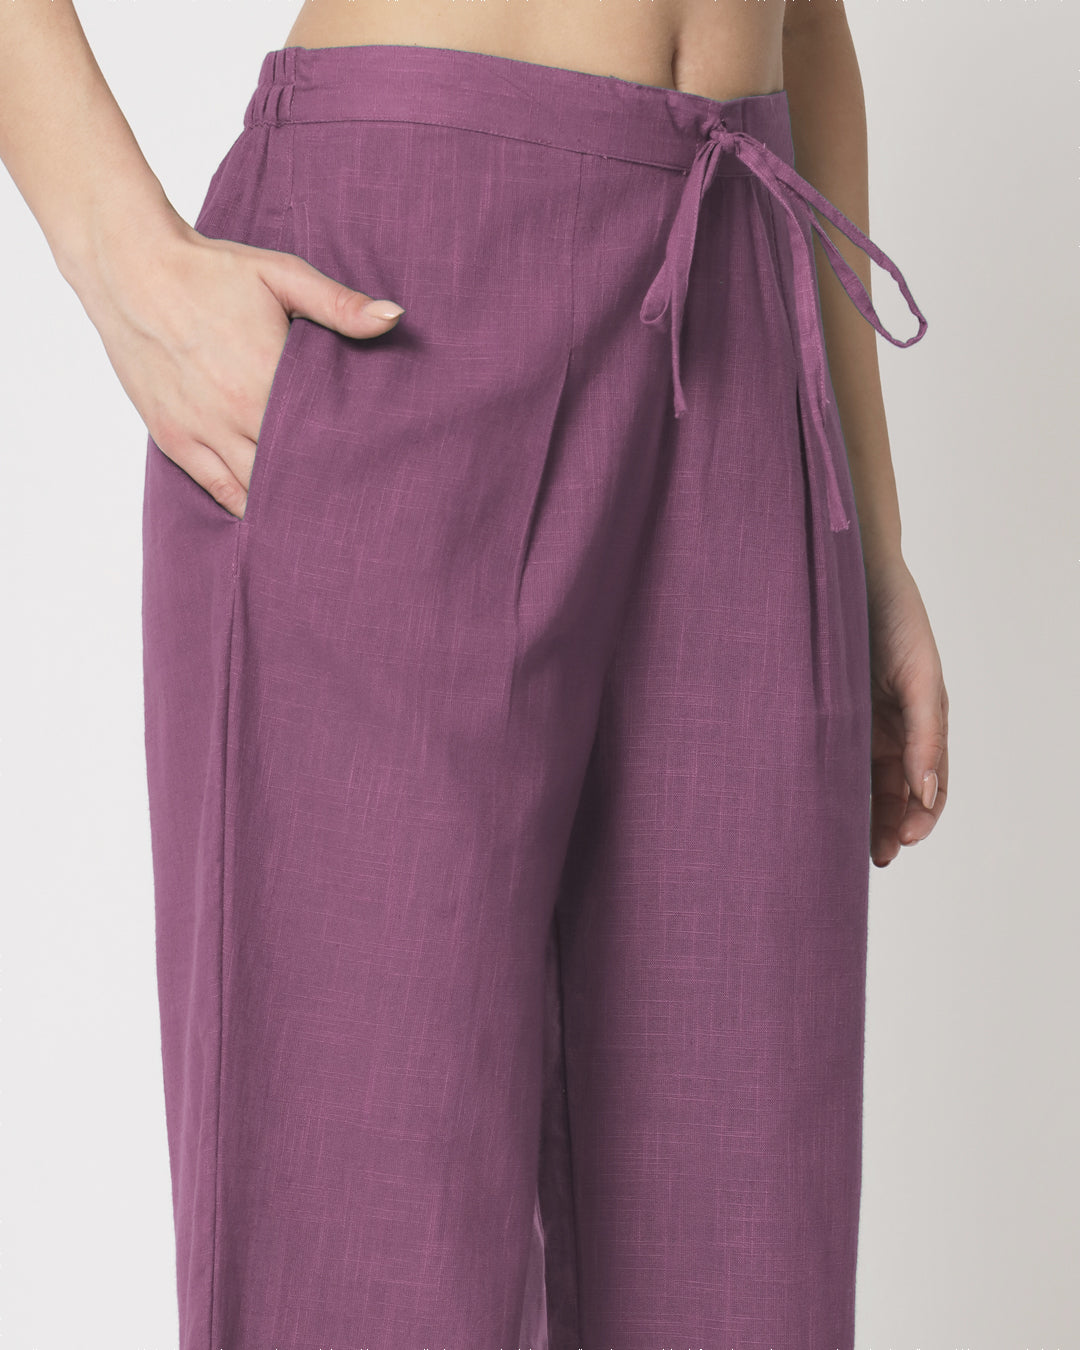 Wisteria Purple Collar Neck Short Length Solid Co-ord Set